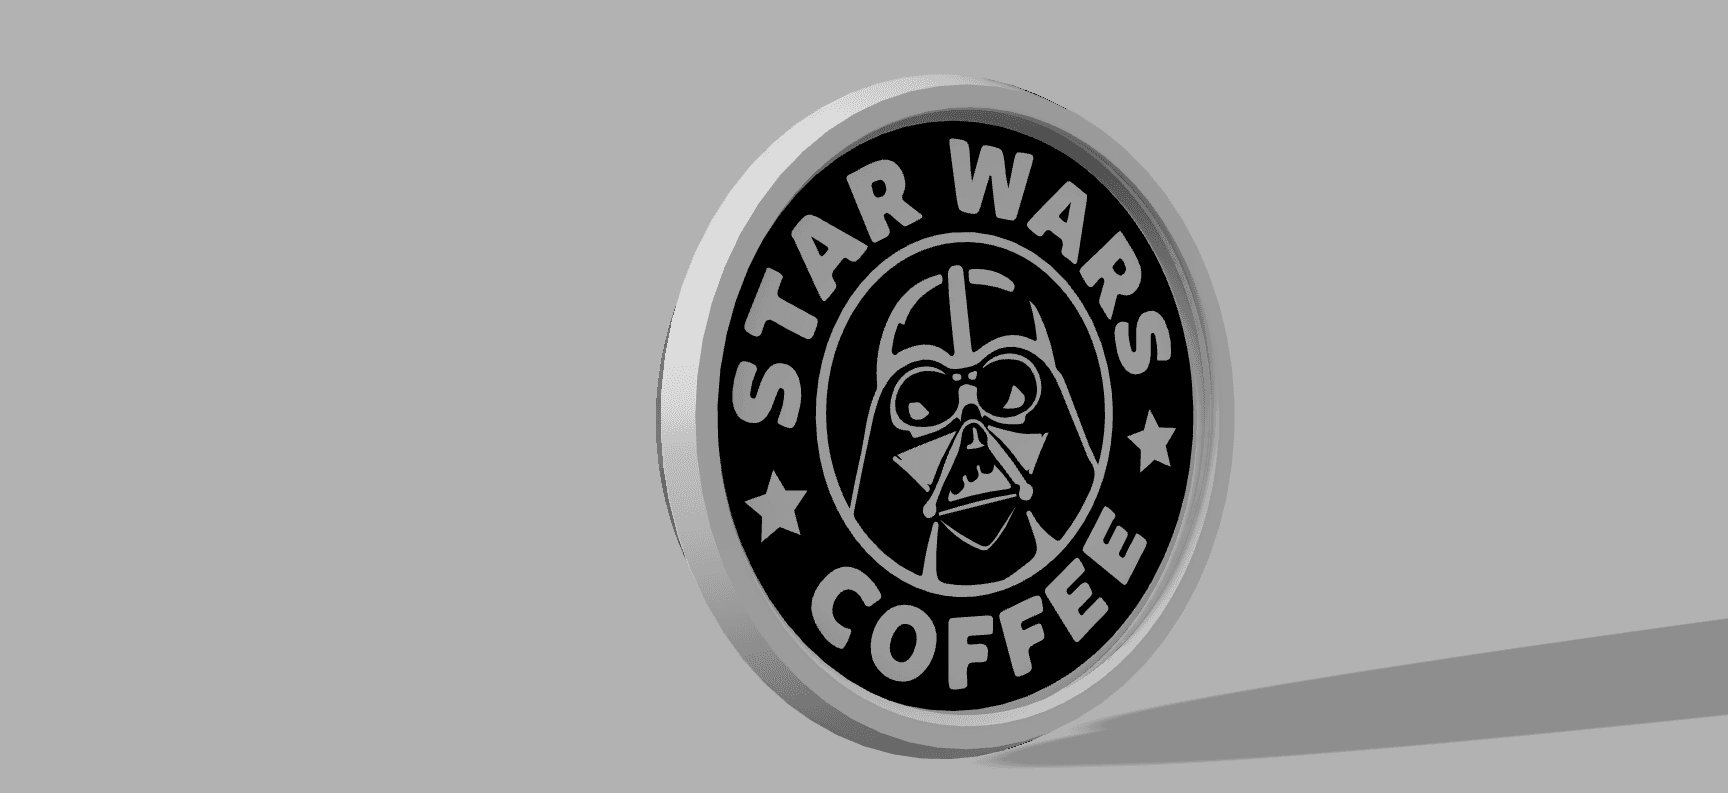 STARWARS COFFEE THREADED AND STACKABLE COASTER SET 3d model